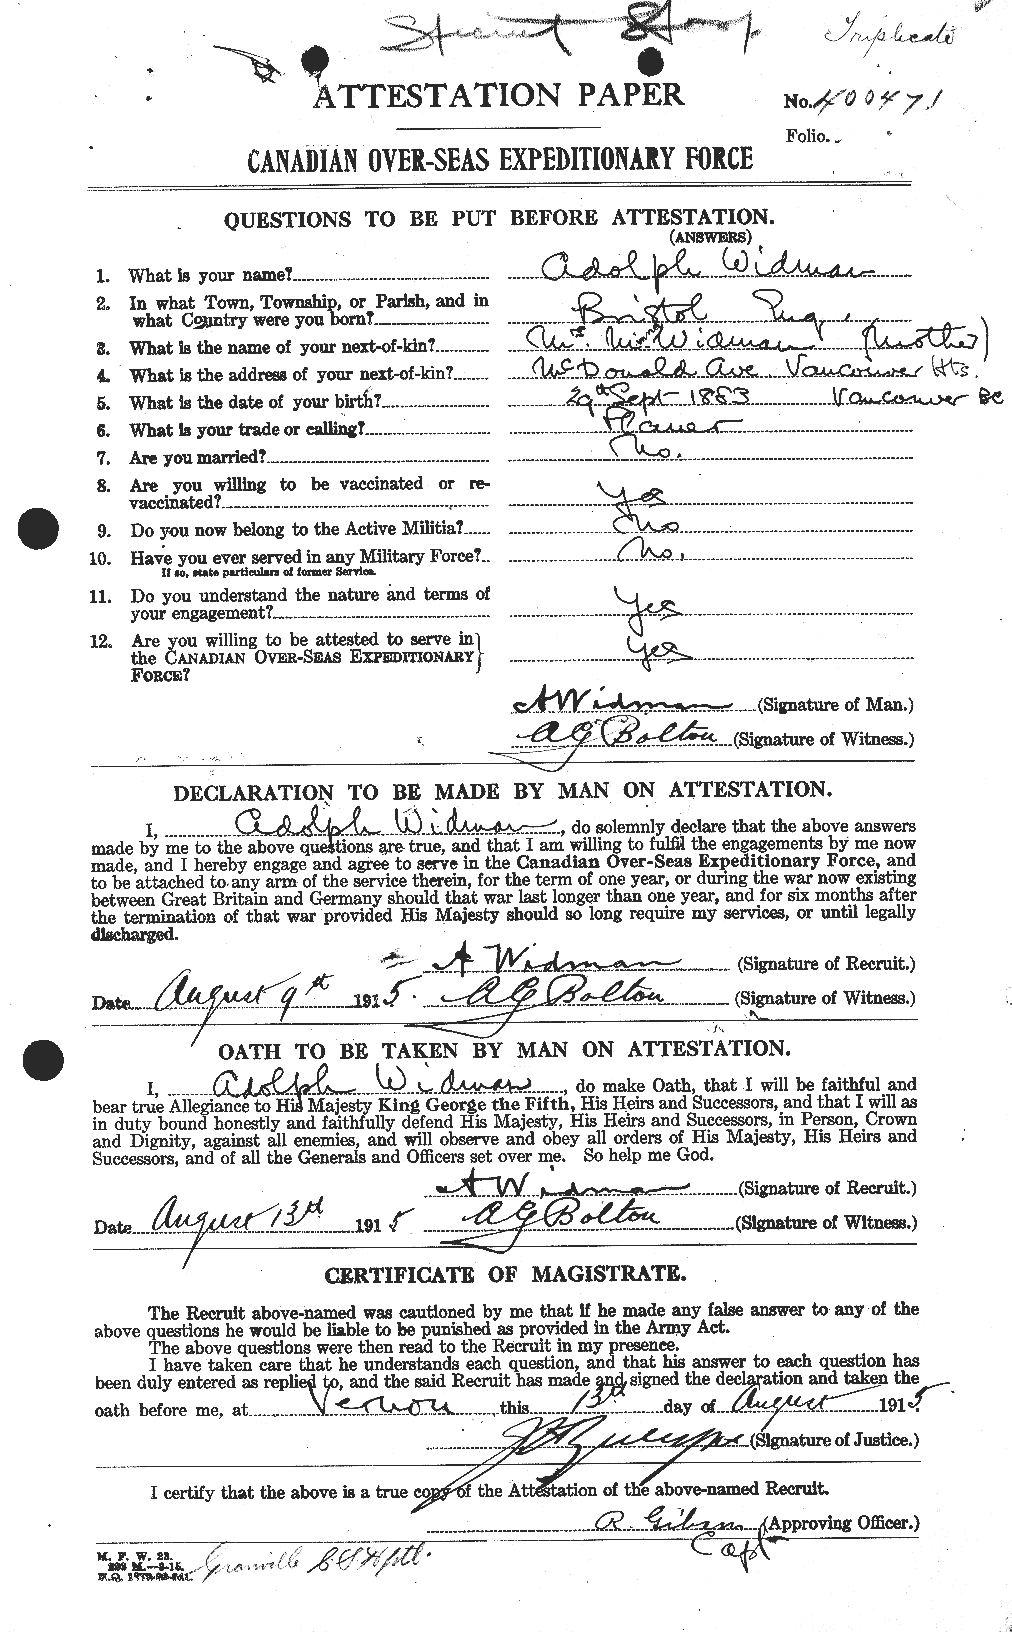 Personnel Records of the First World War - CEF 674114a